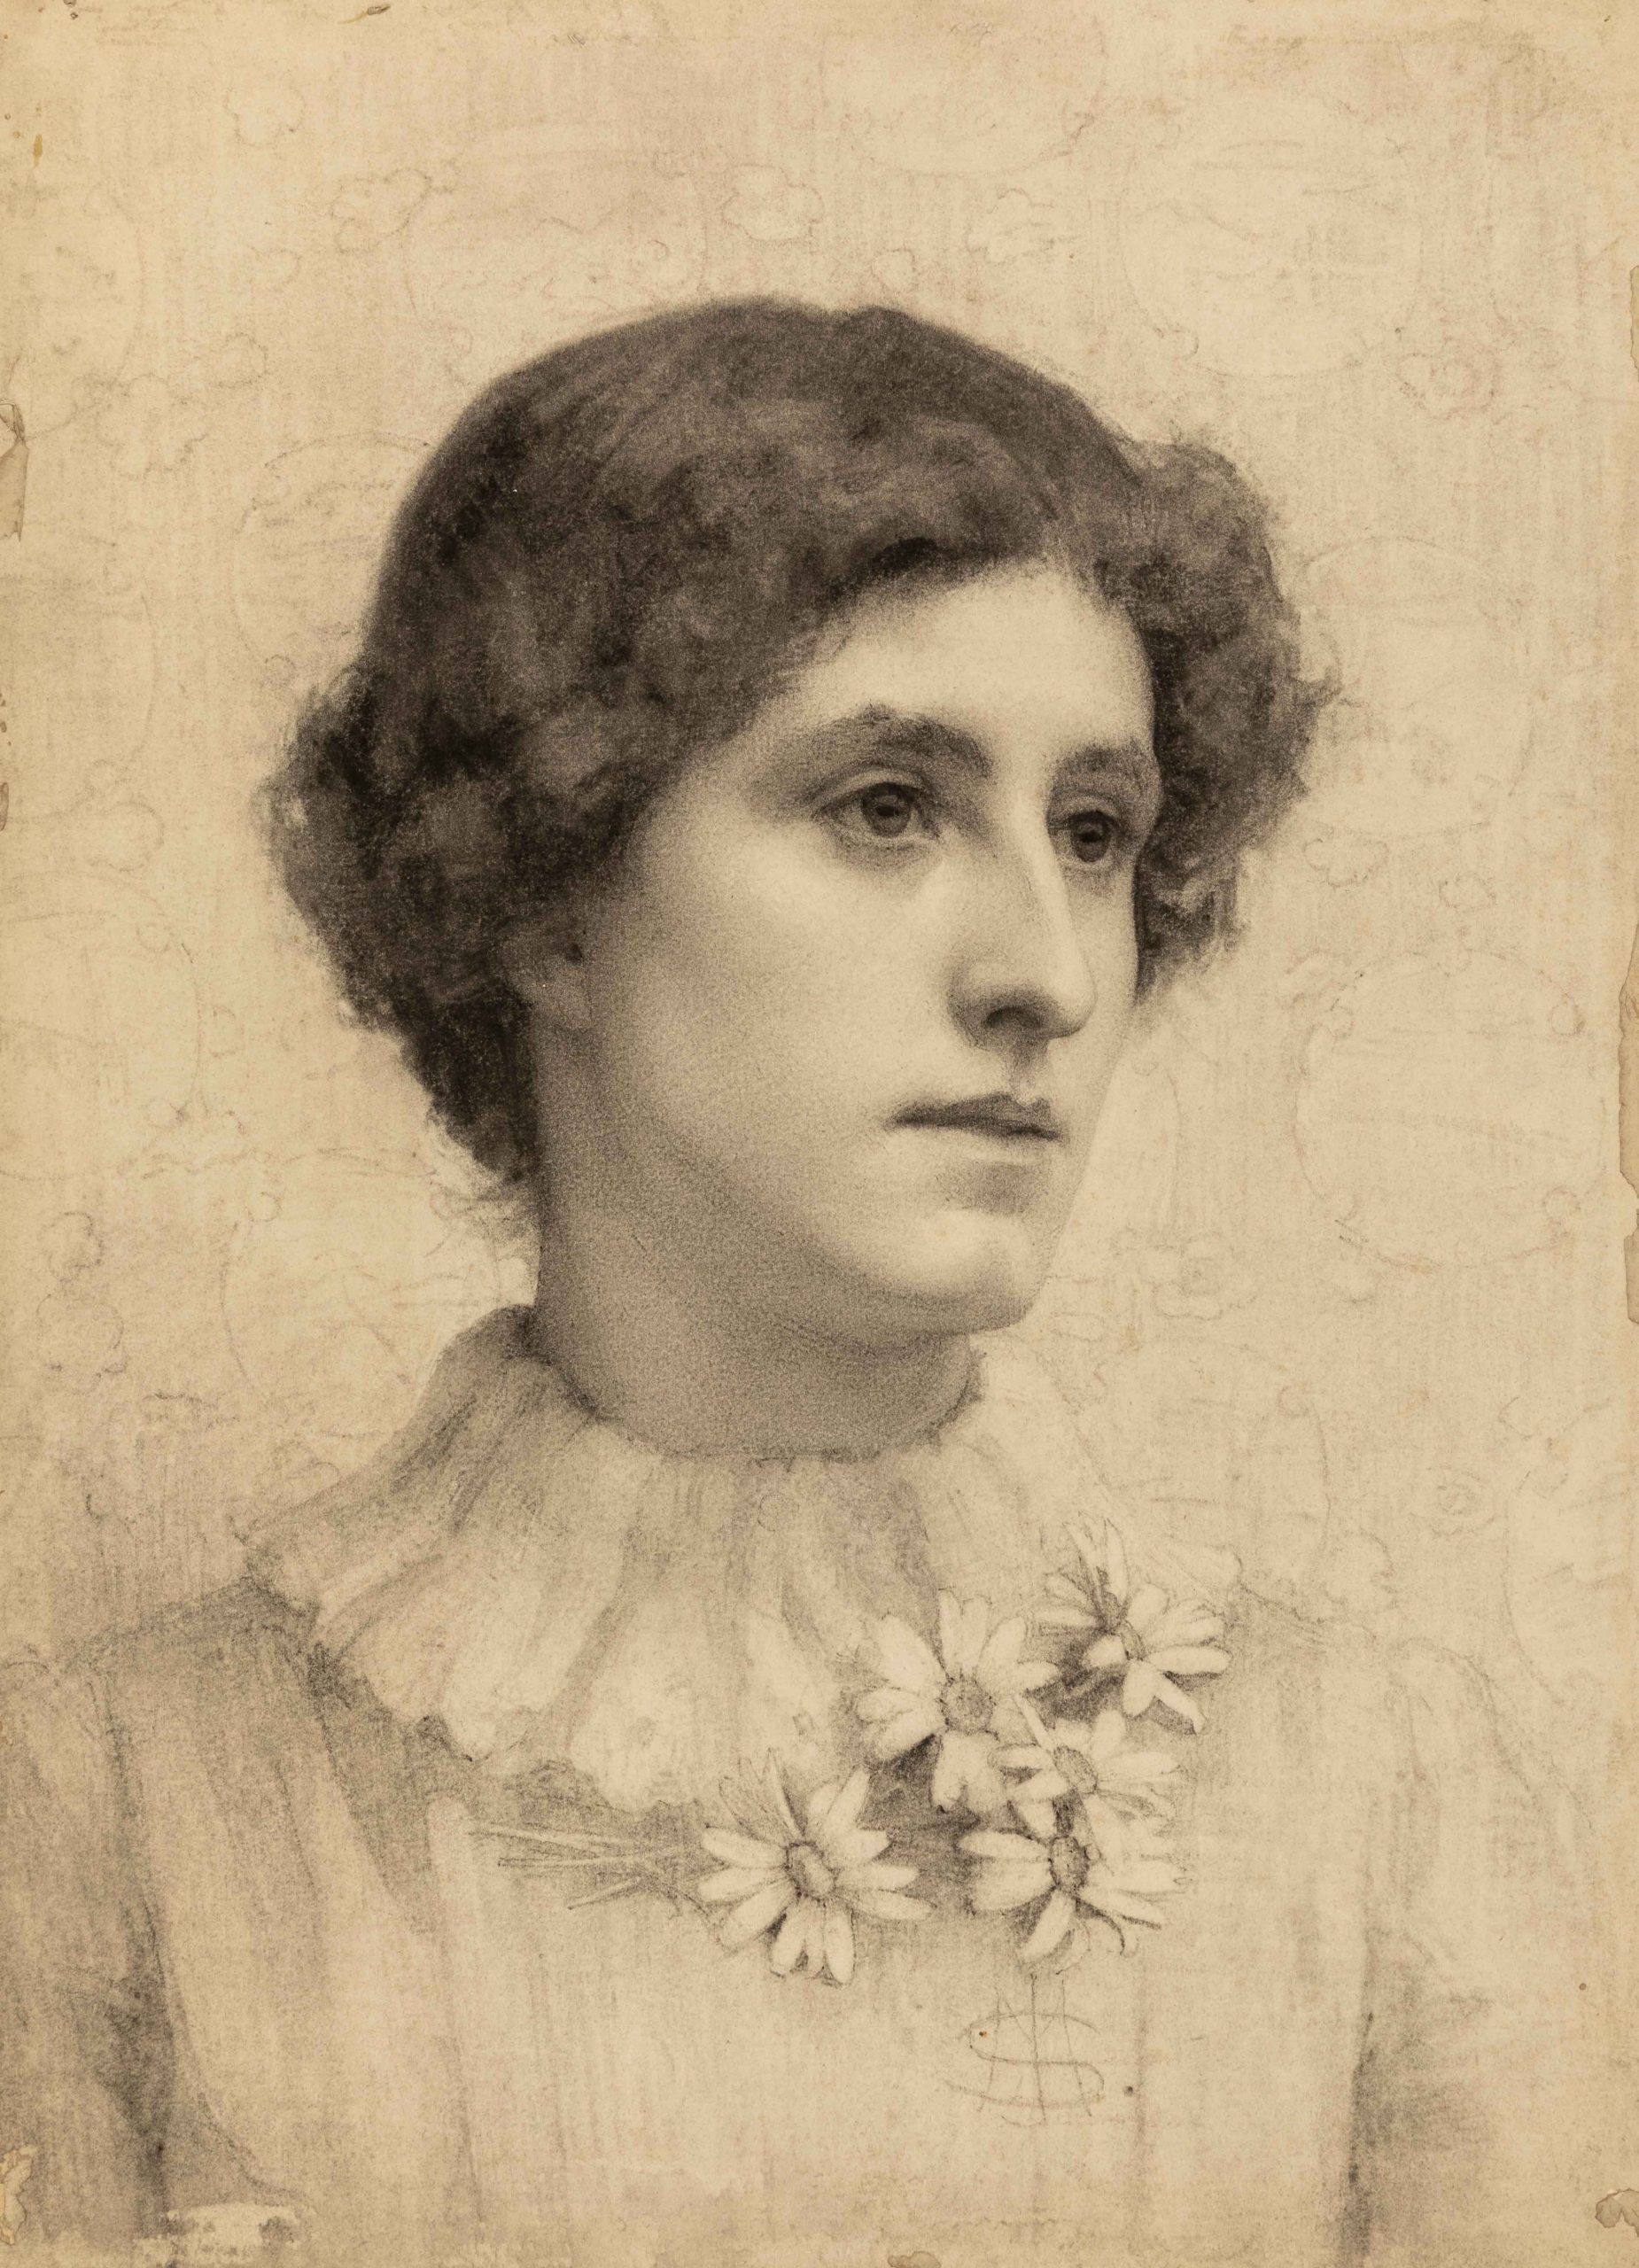 Bust-length portrait of a young woman in front of patterned wallpaper  